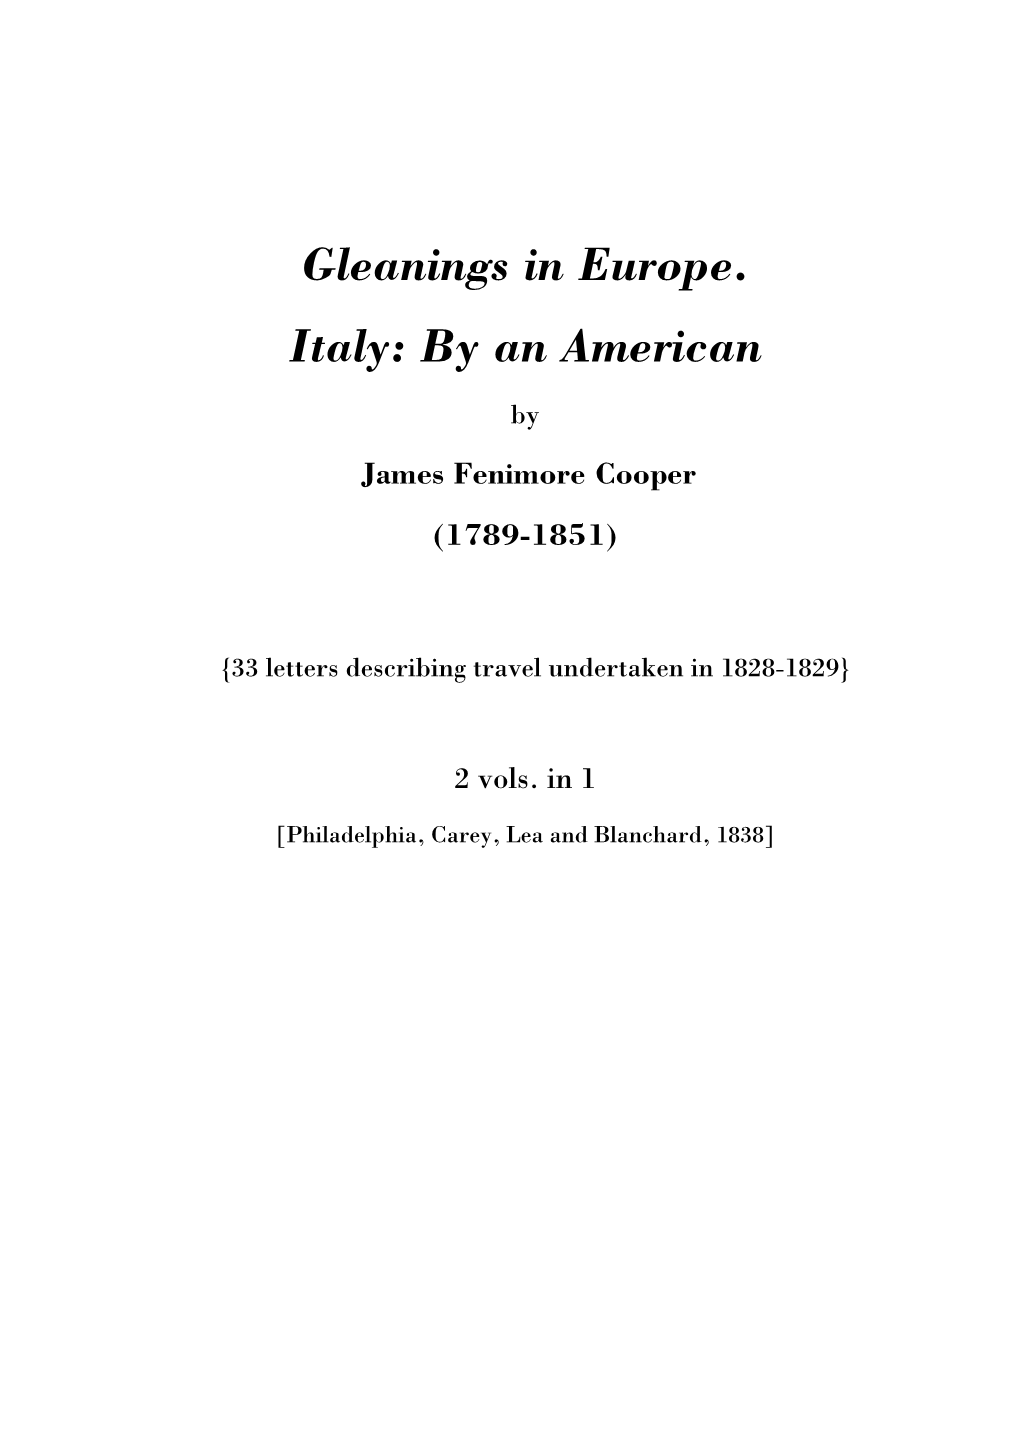 Gleanings in Europe. Italy: by an American